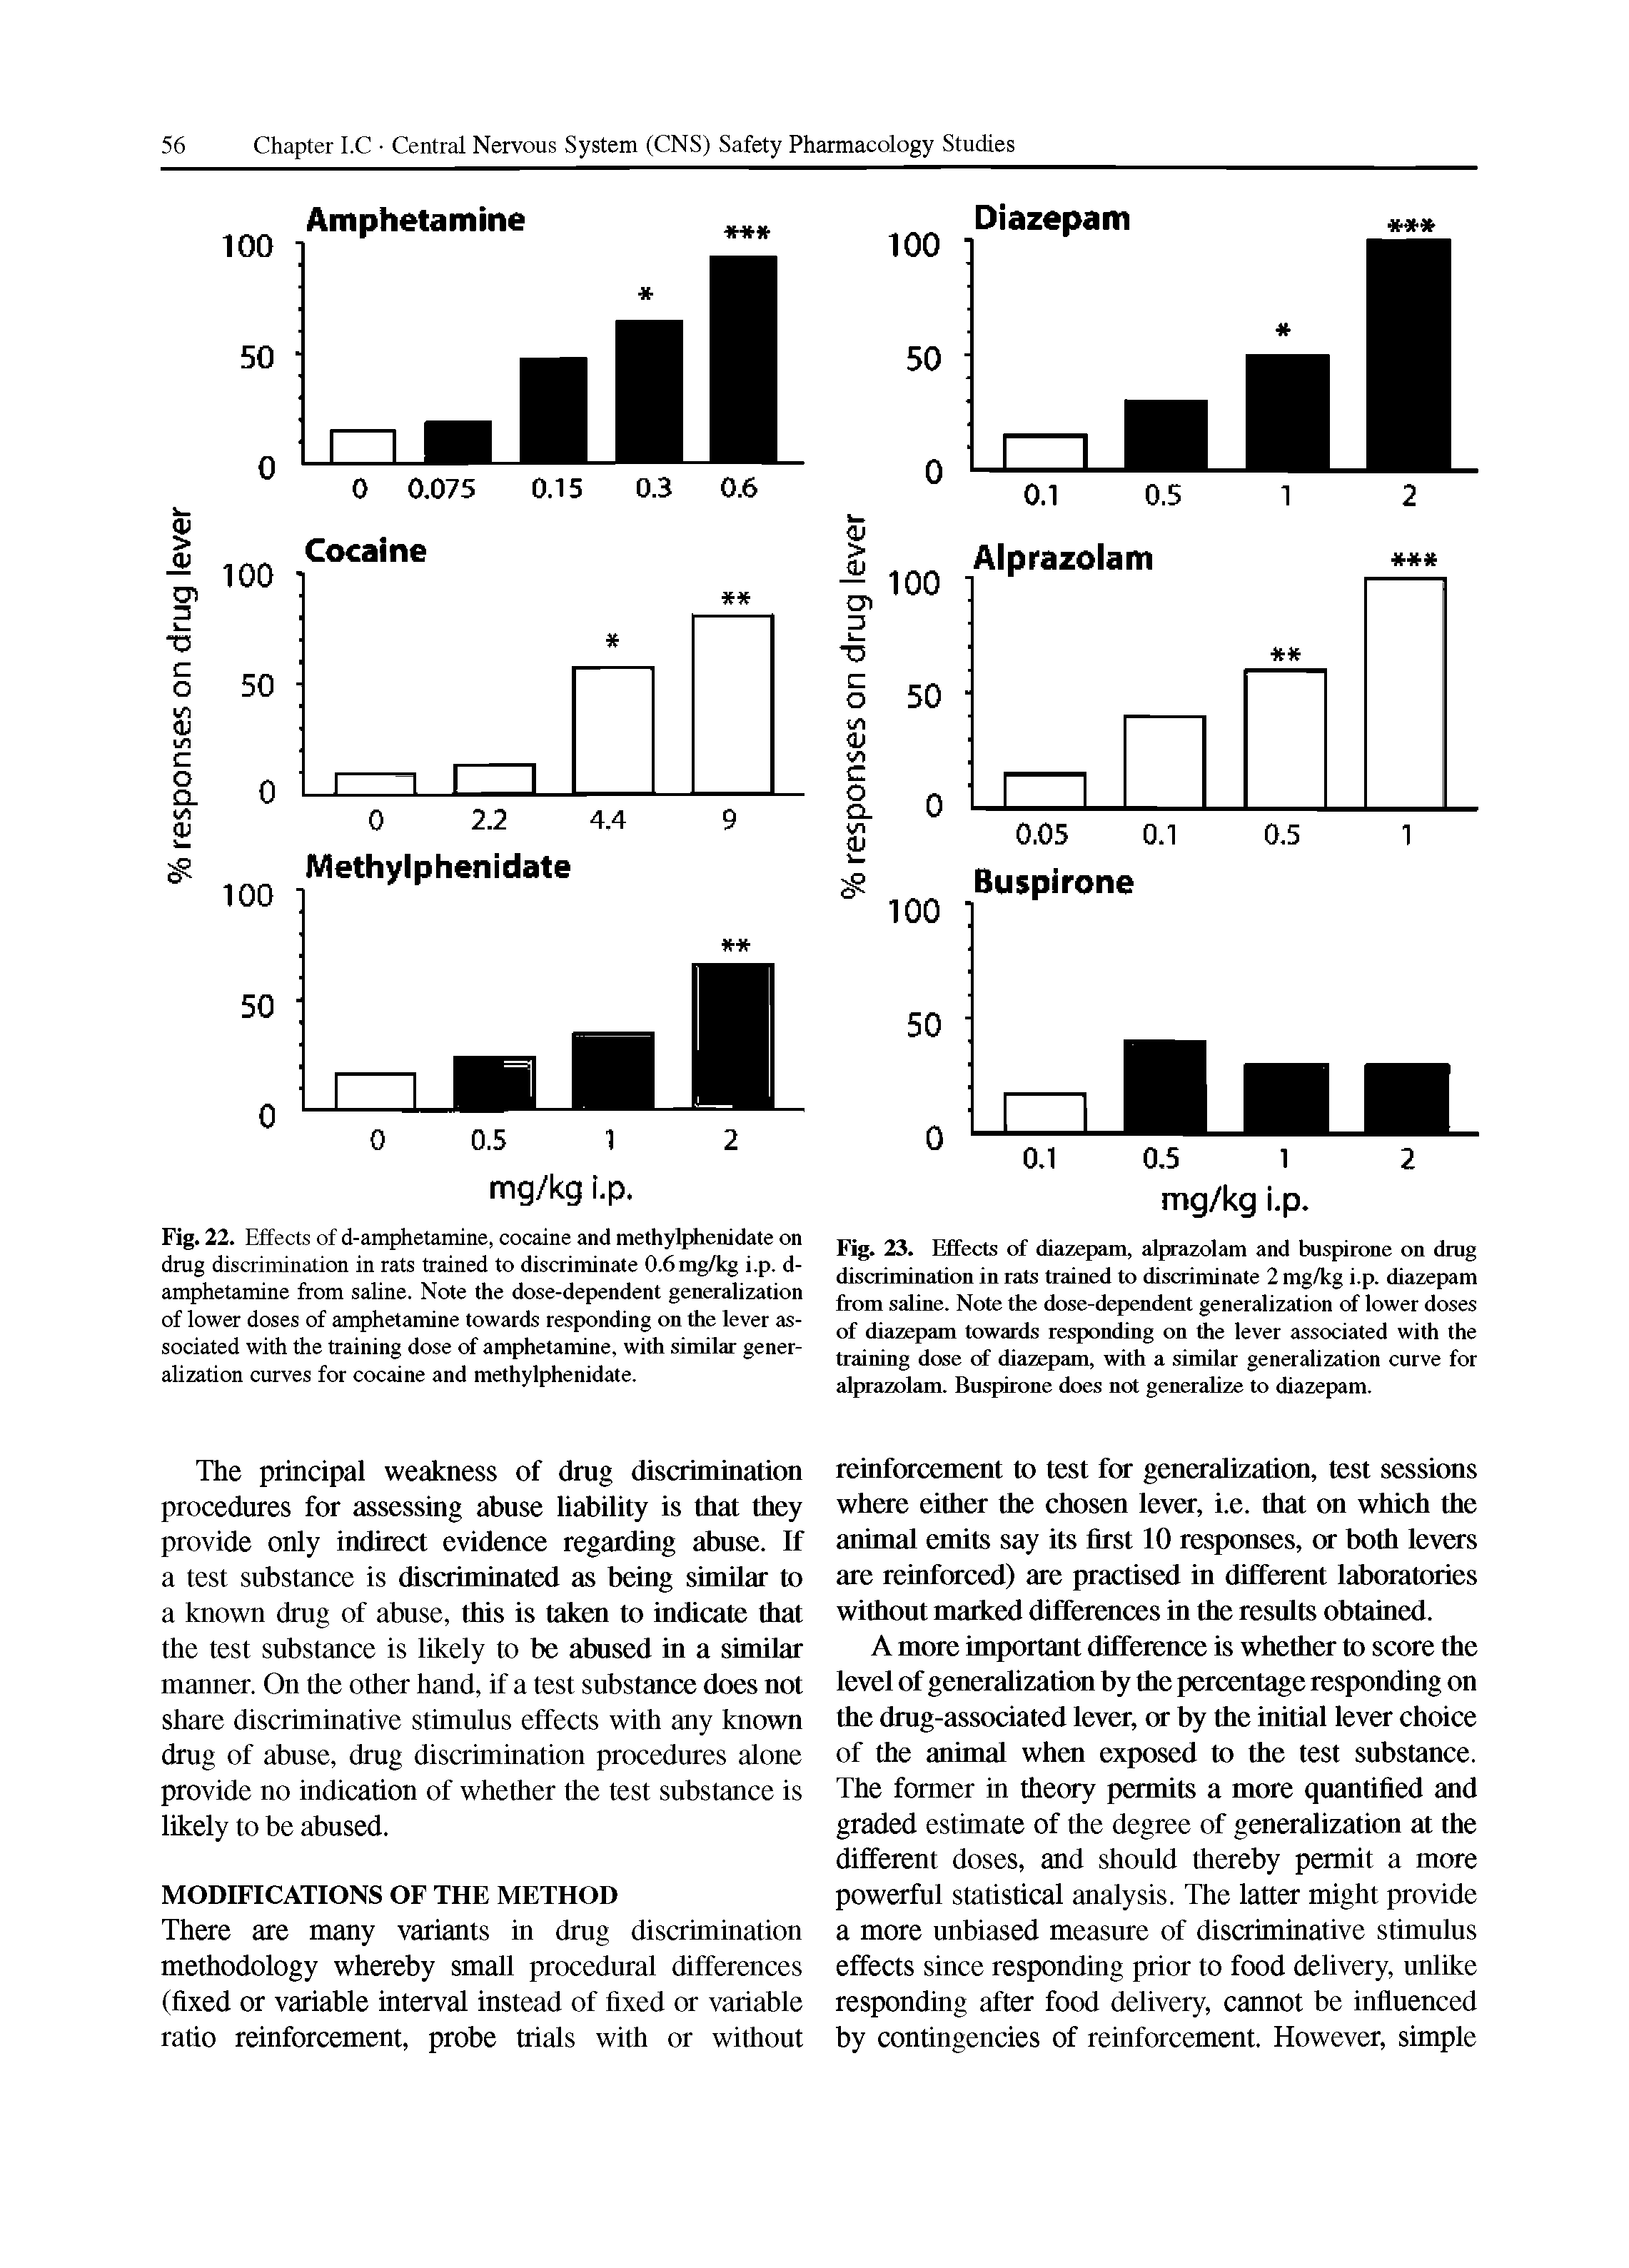 Fig. 22. Effects of d-amphetamine, cocaine and methylphenidate on drug discrimination in rats trained to discriminate 0.6 mg/kg i.p. d-amphetamine from saline. Note the dose-dependent generalization of lower doses of amphetamine towards responding on the lever associated with the training dose of amphetamine, with similar generalization curves for cocaine and methylphenidate.